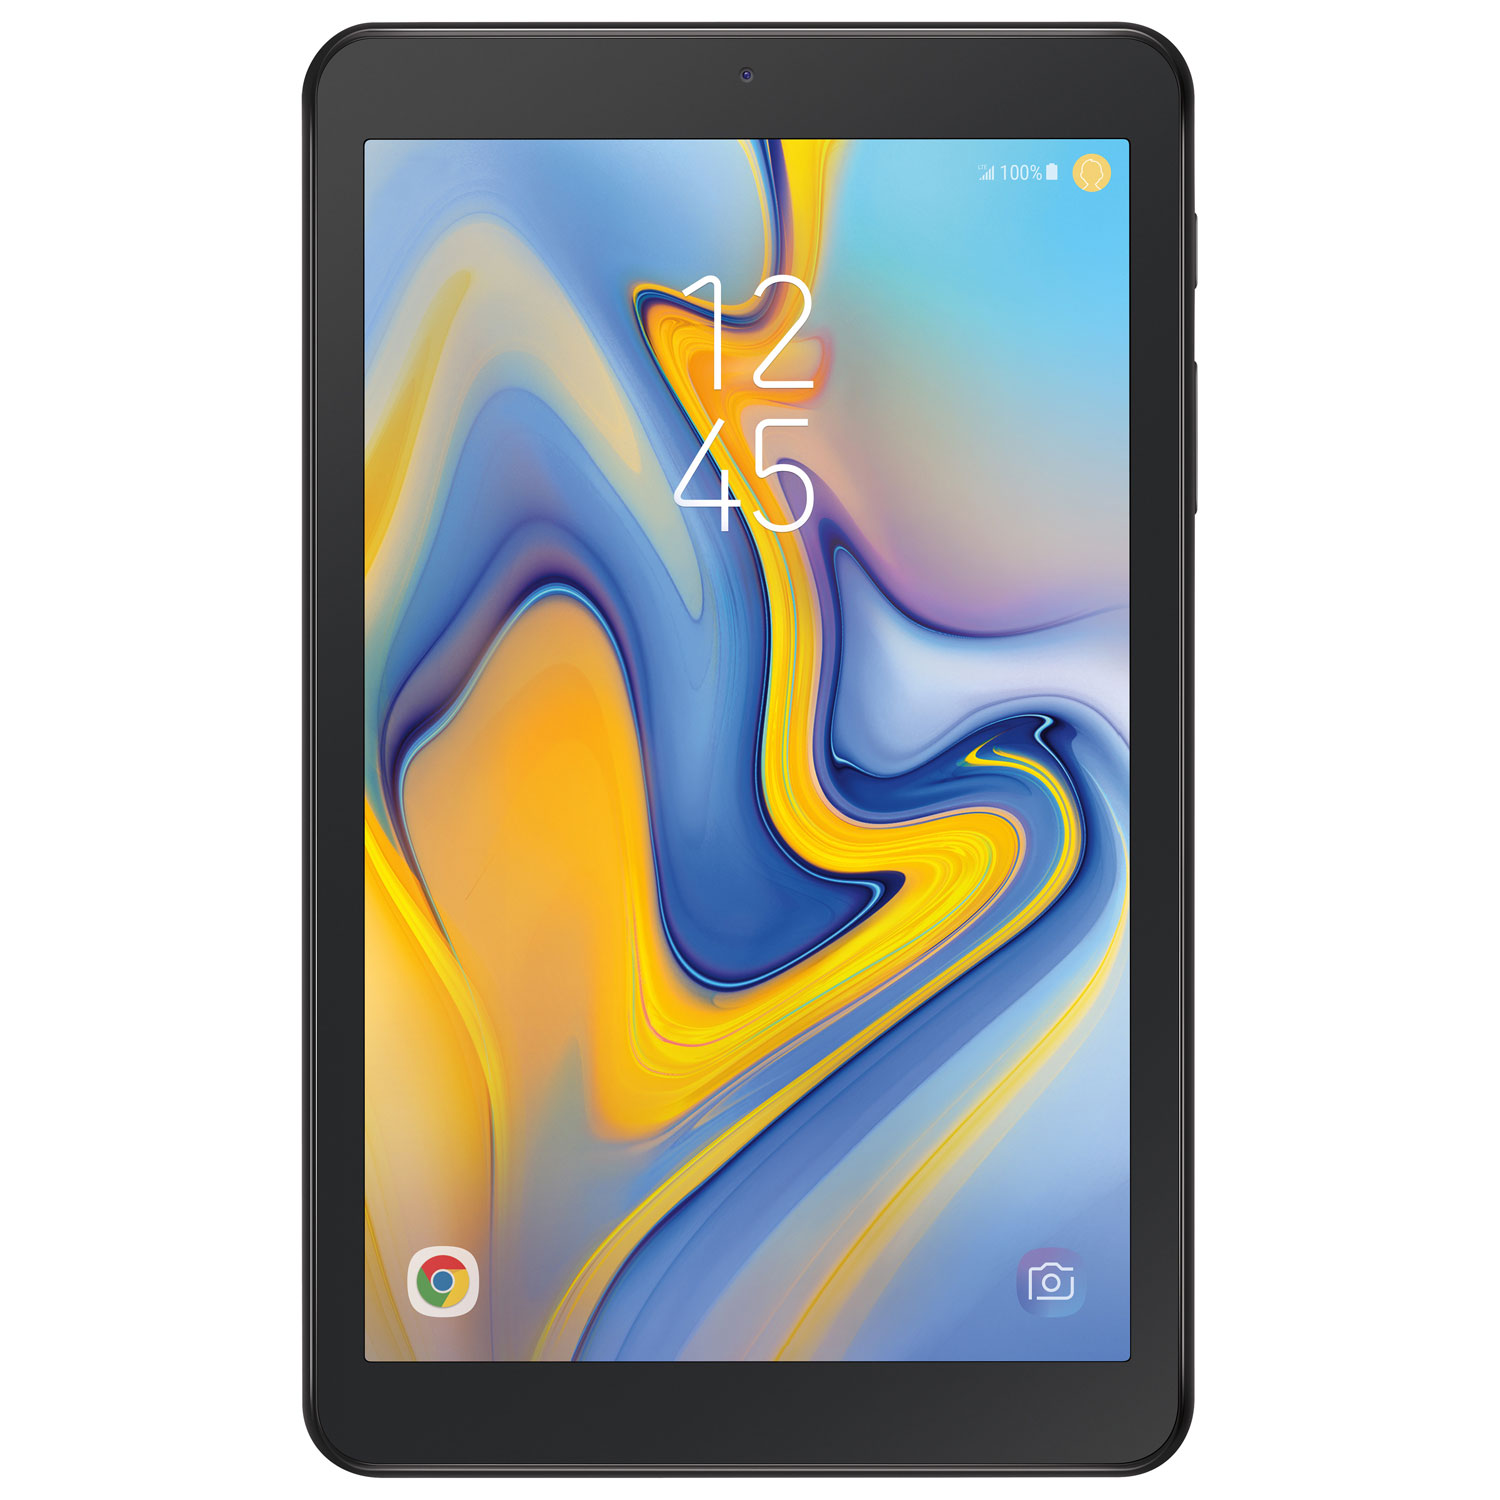 Rogers Samsung Galaxy Tab A 8" 32GB Android O LTE Tablet With Snapdragon 425 4-Core Processor -Black - Monthly Financing